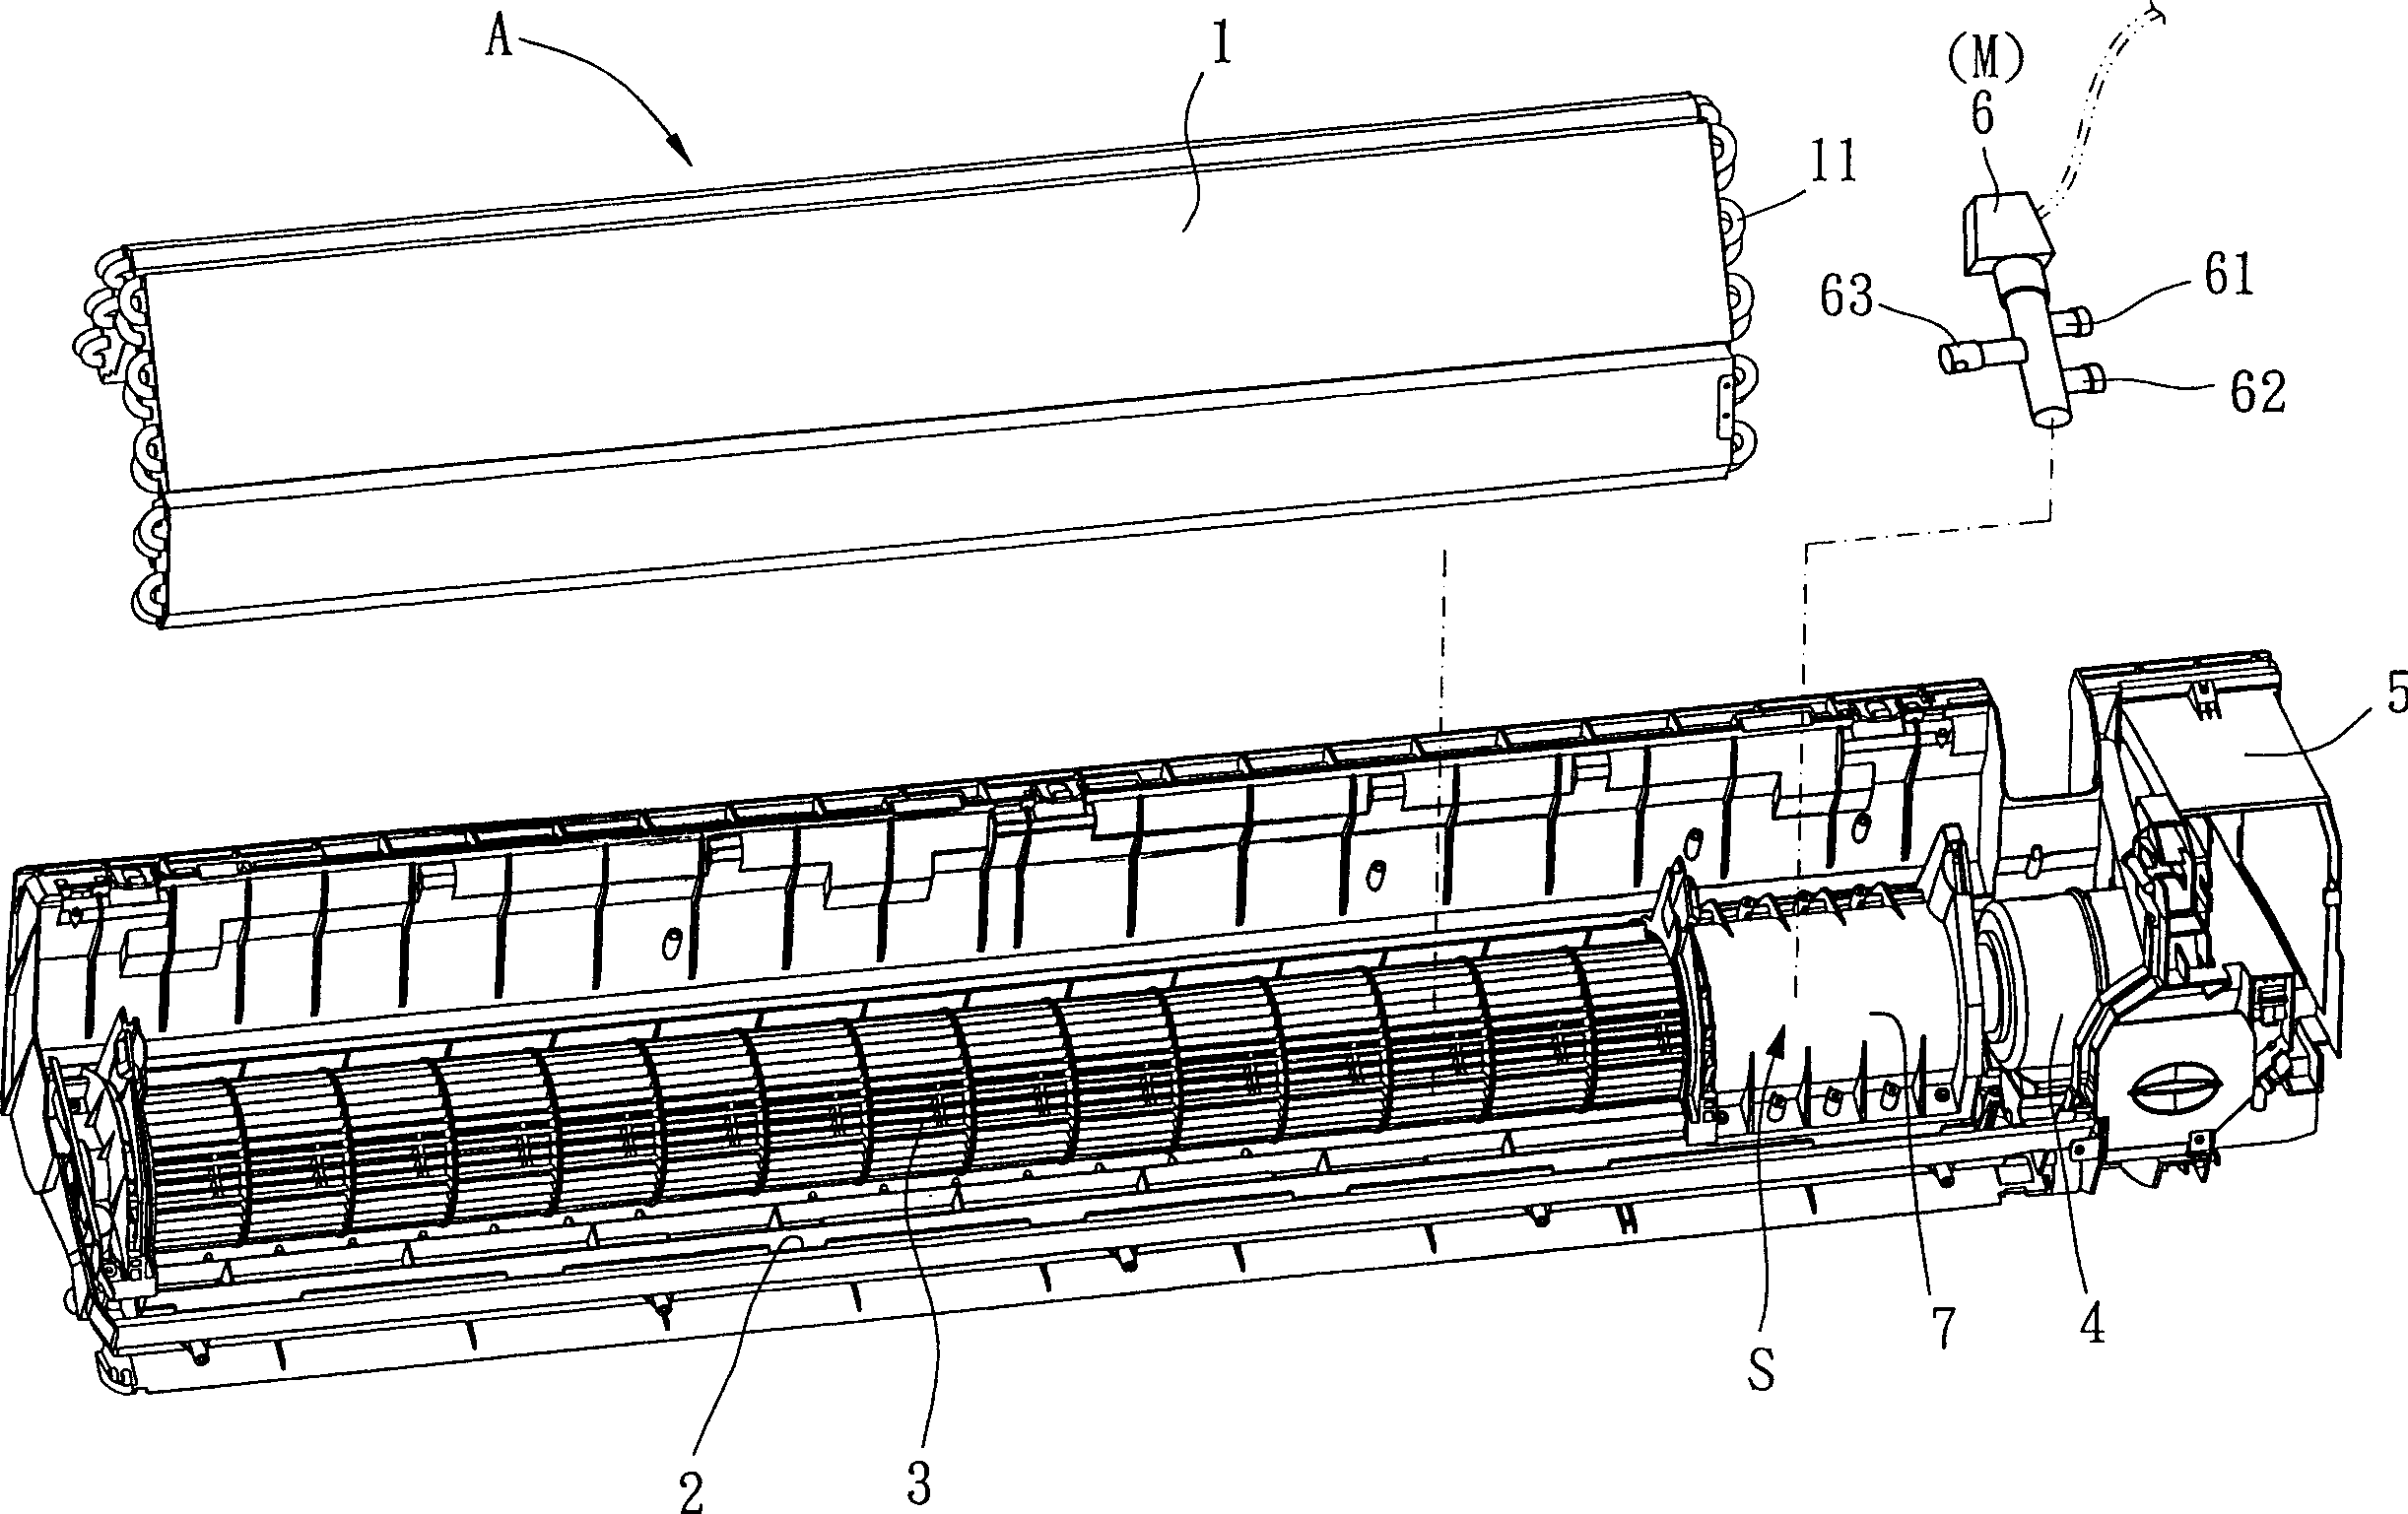 Structure of wall air conditioner